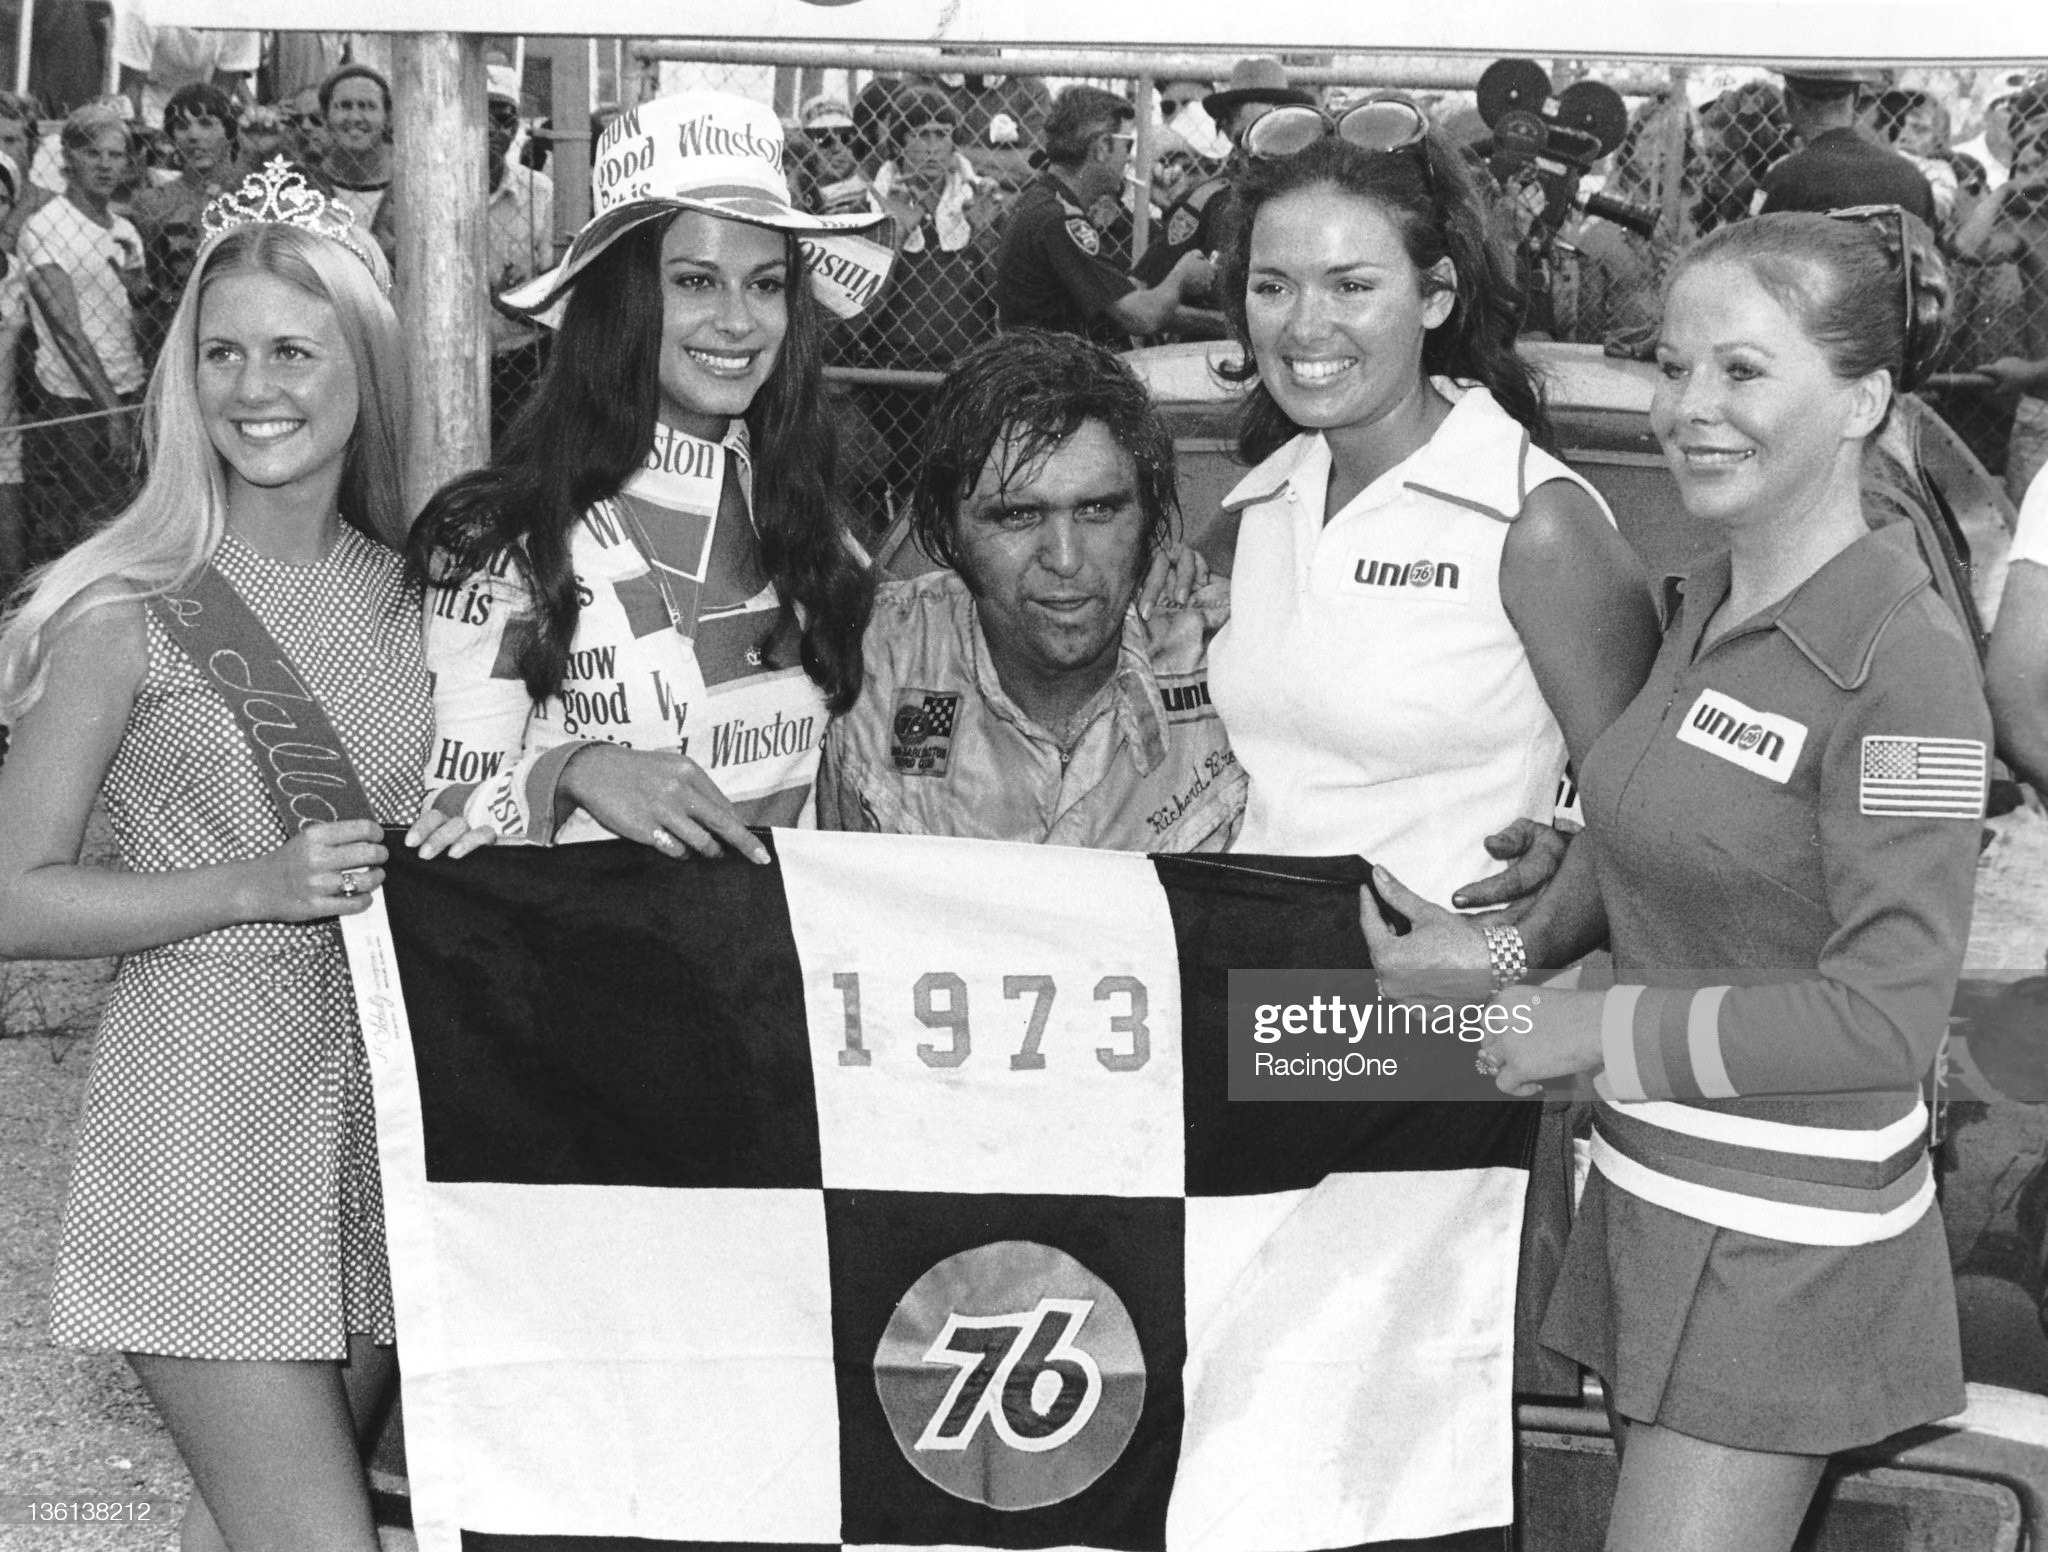 August 12, 1973: a tired Dick Brooks is joined by a bevy of race queens following the only NASCAR Cup victory of his career, the Talladega 500, at Alabama International Motor Speedway. 